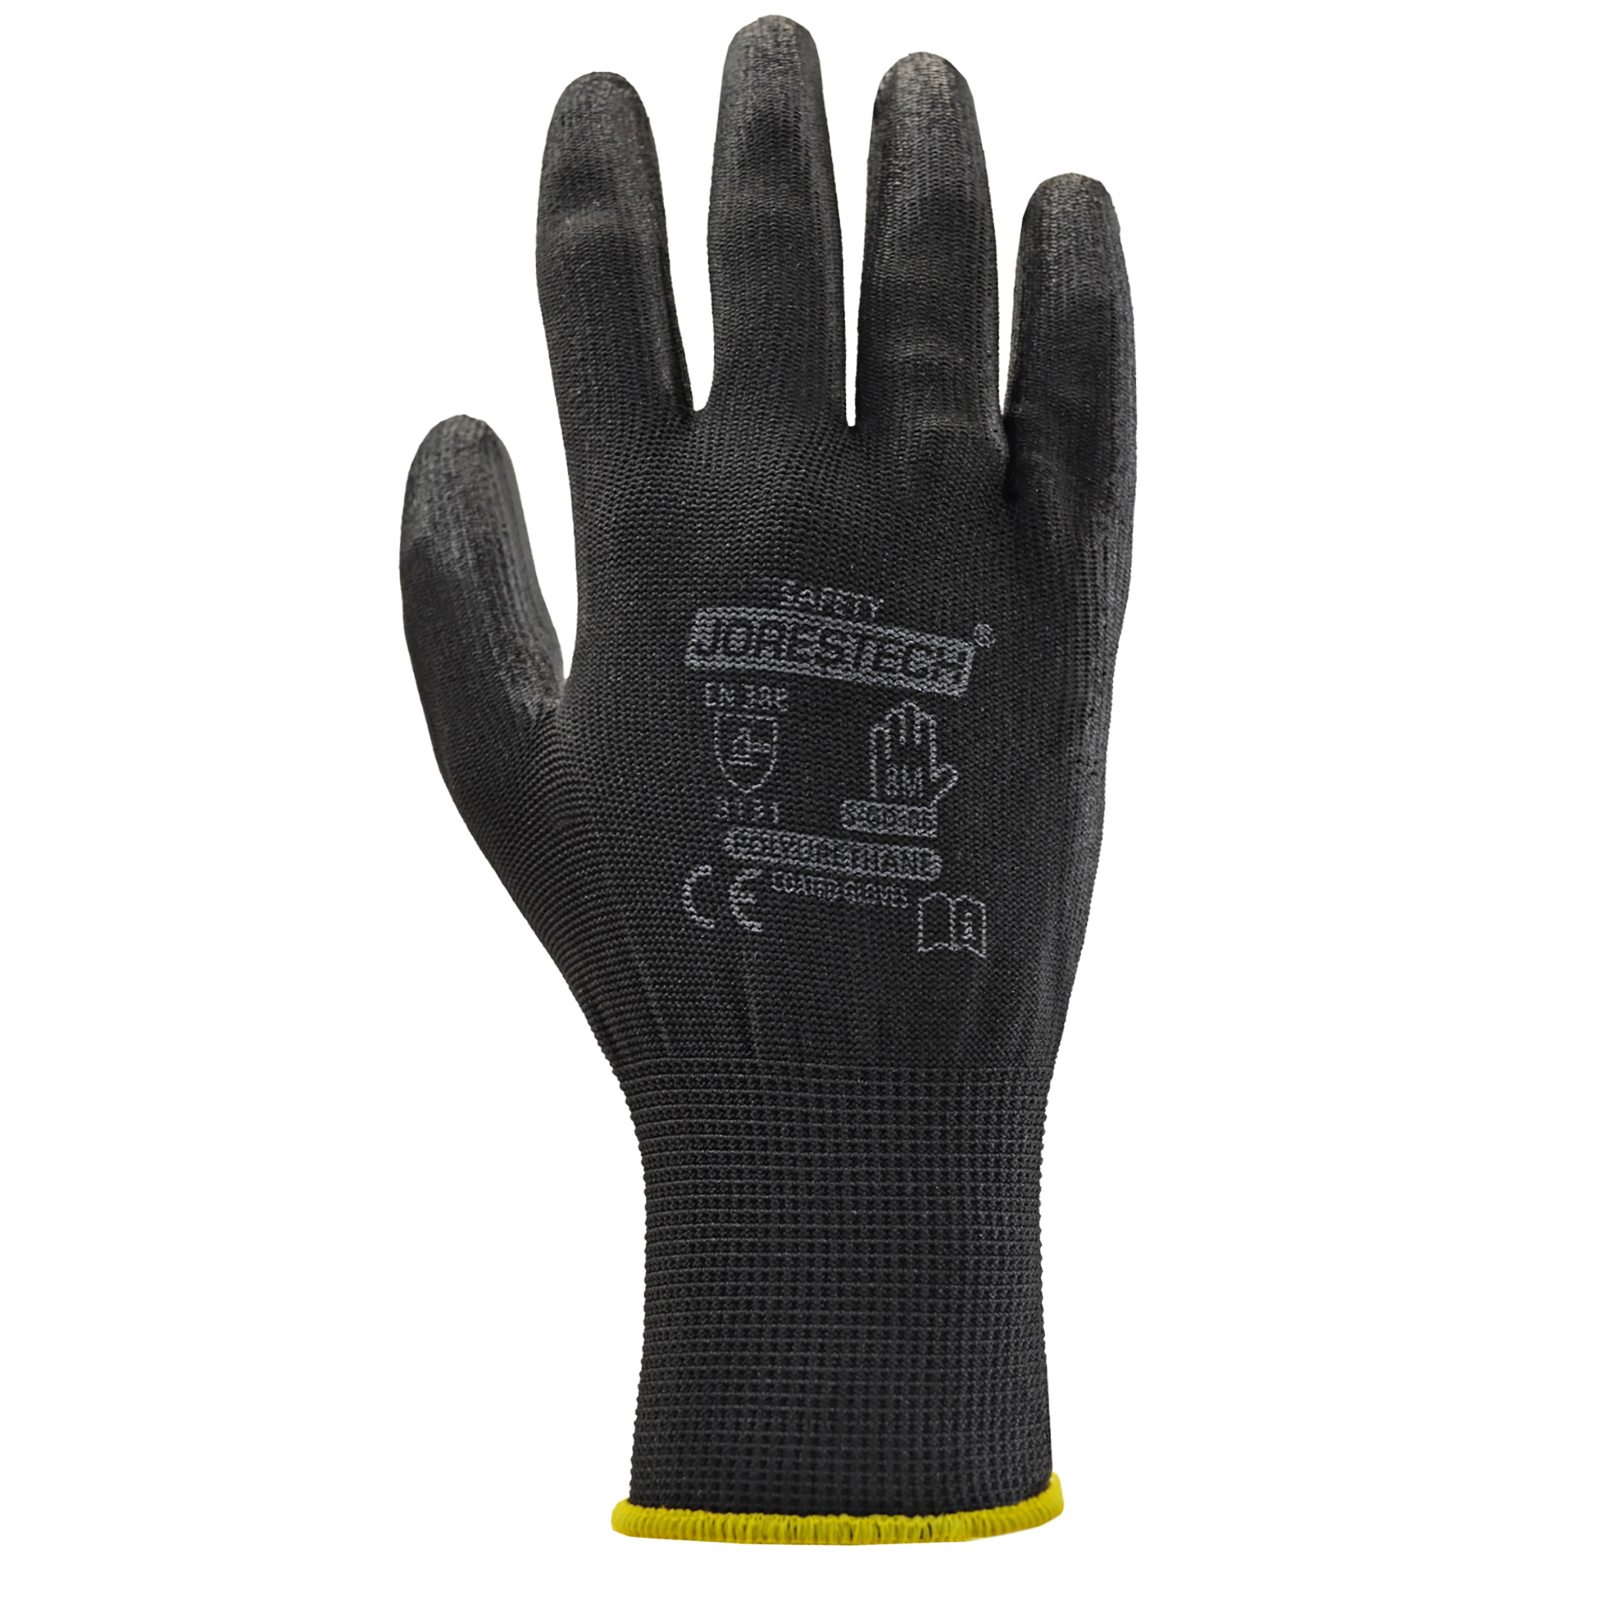 Black thin safety work glove with polyurethane dipped palms